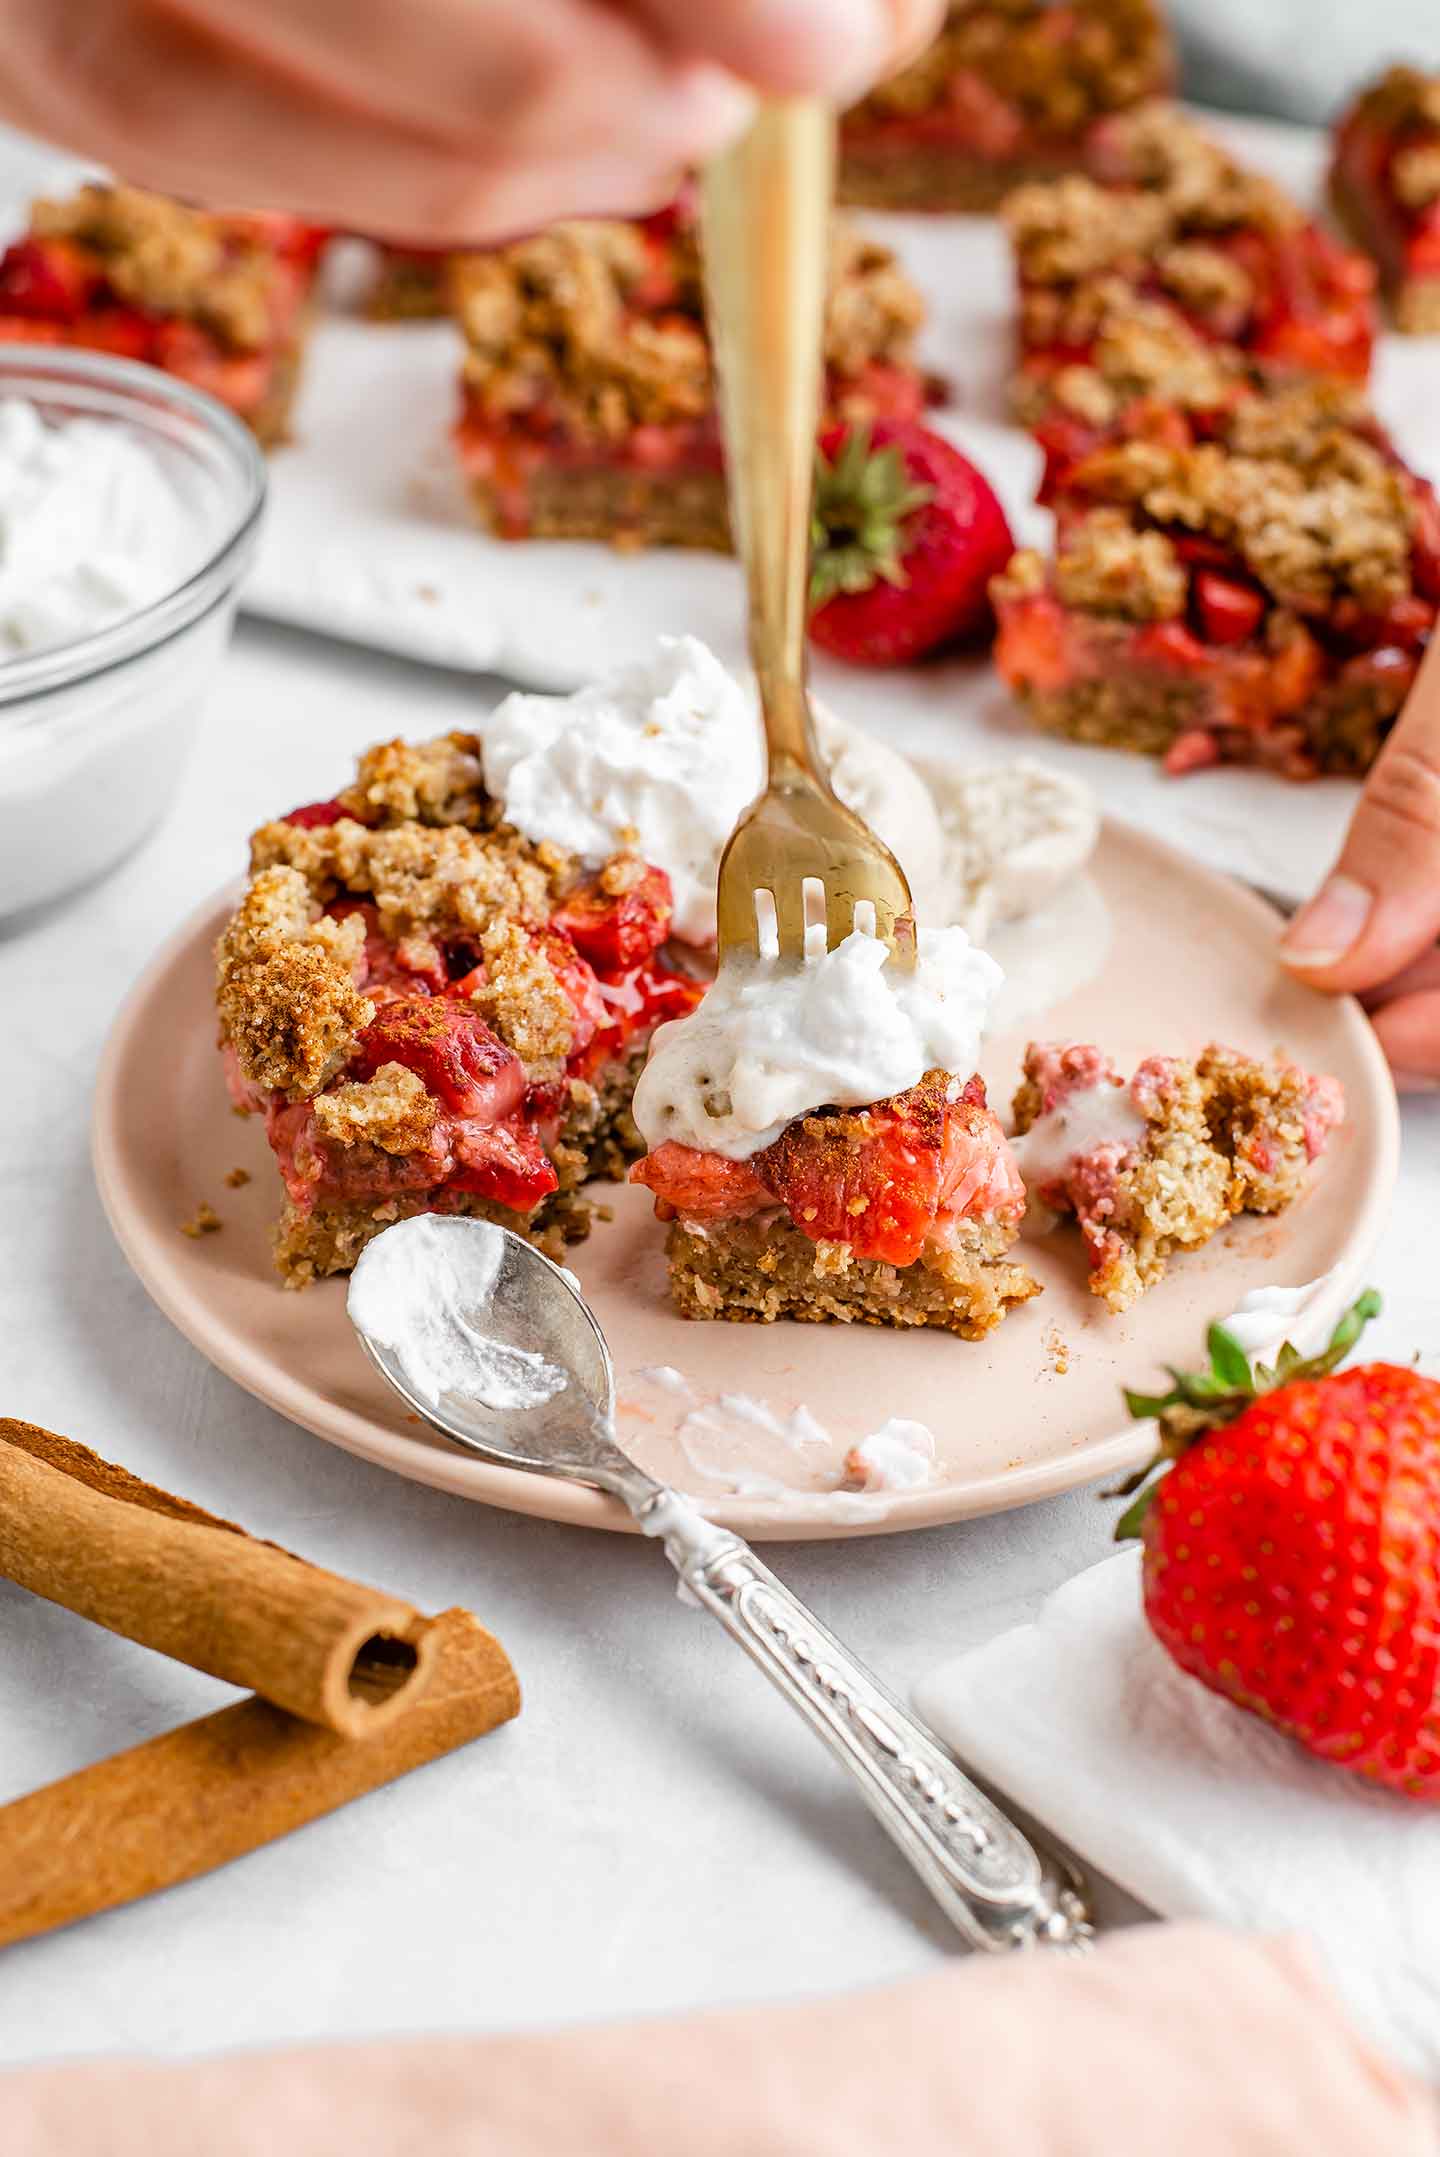 Side view of a strawberry crumble topped with ice cream and whipped cream on a fork. Strawberry bars fill a tray in the background.